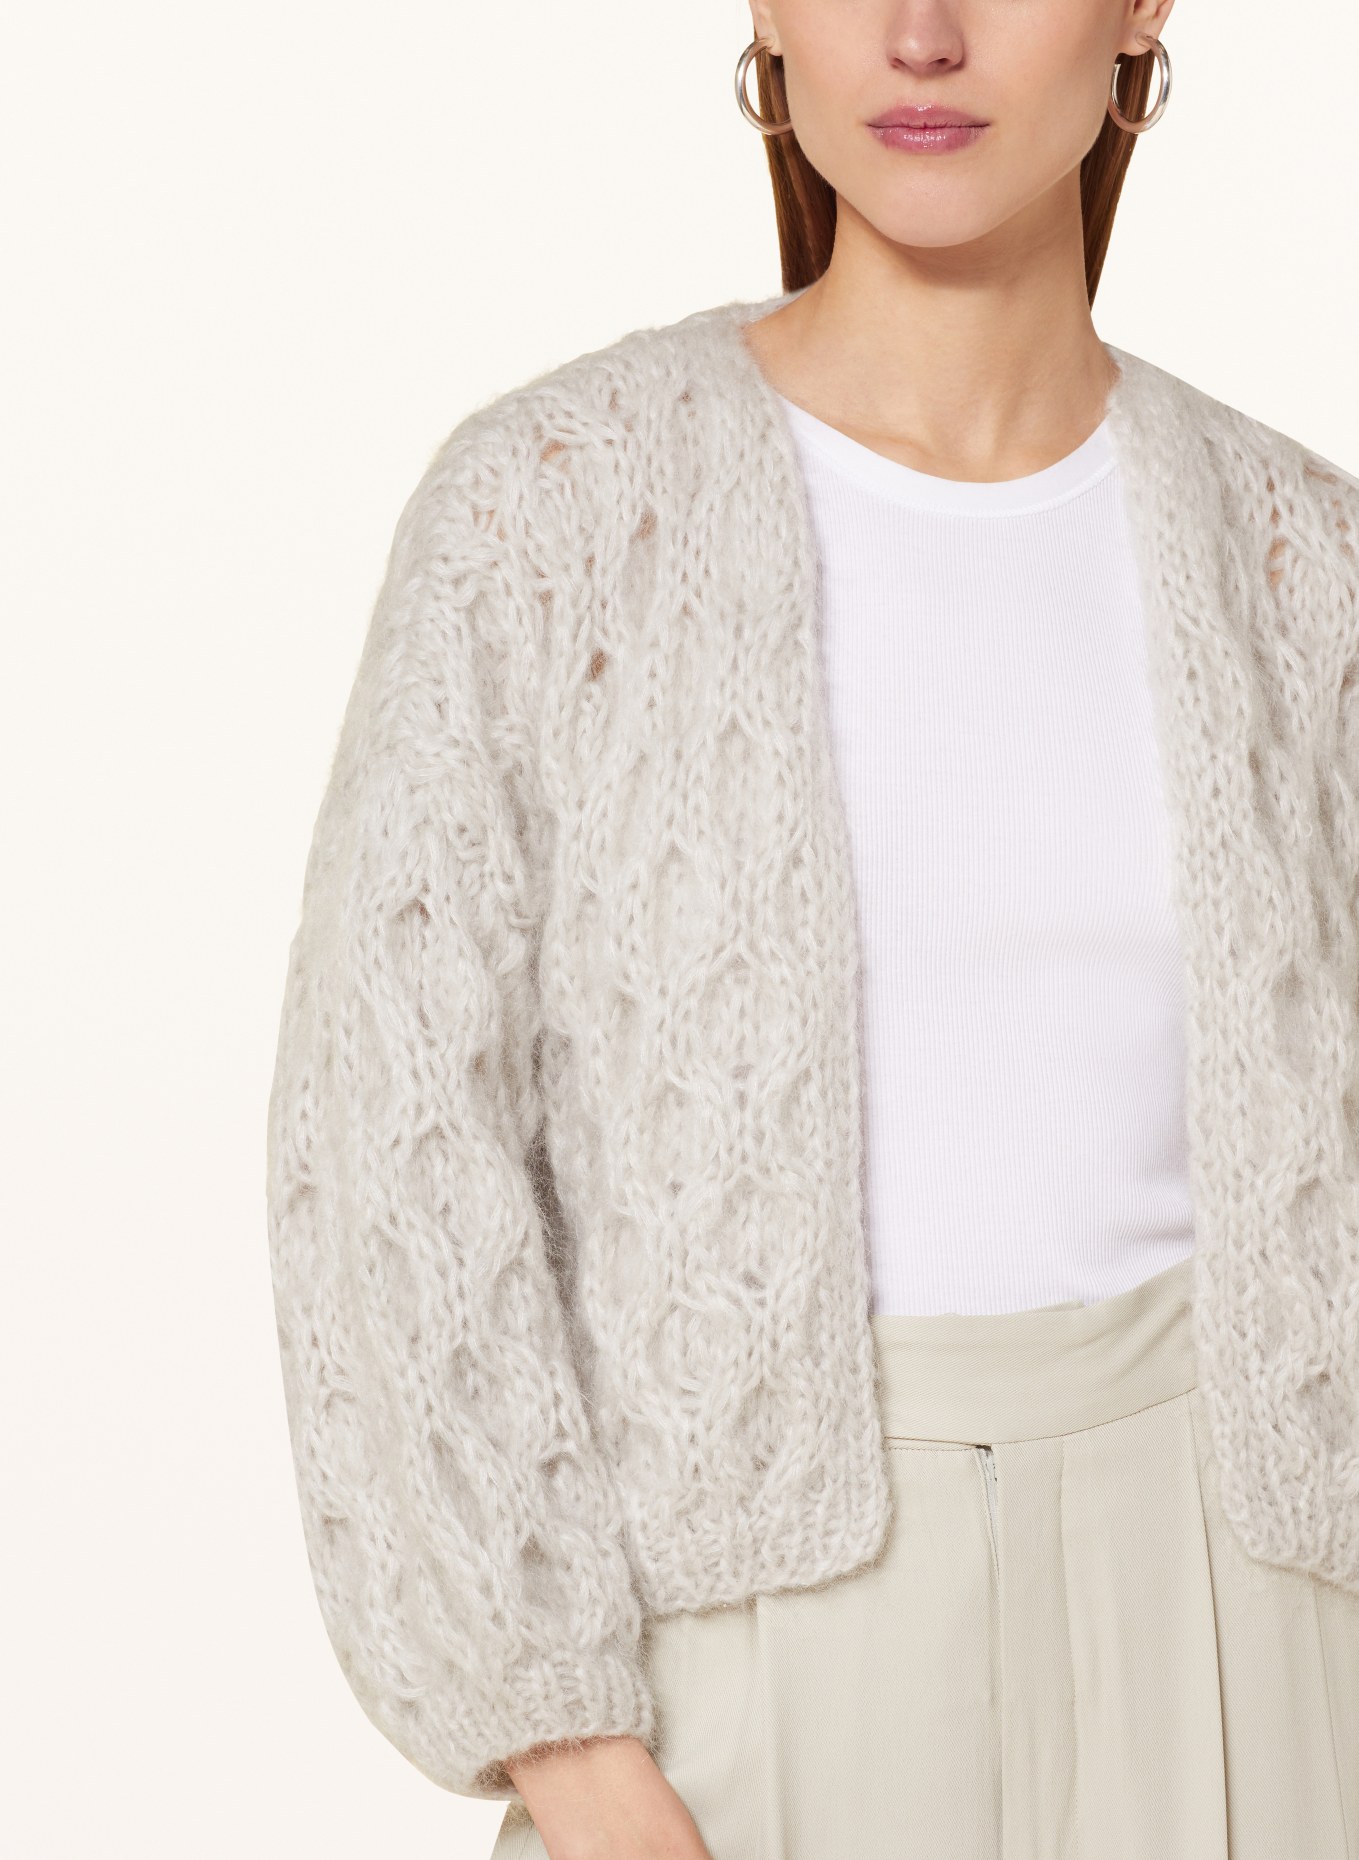 MAIAMI Knit cardigan made of mohair, Color: LIGHT GRAY (Image 4)